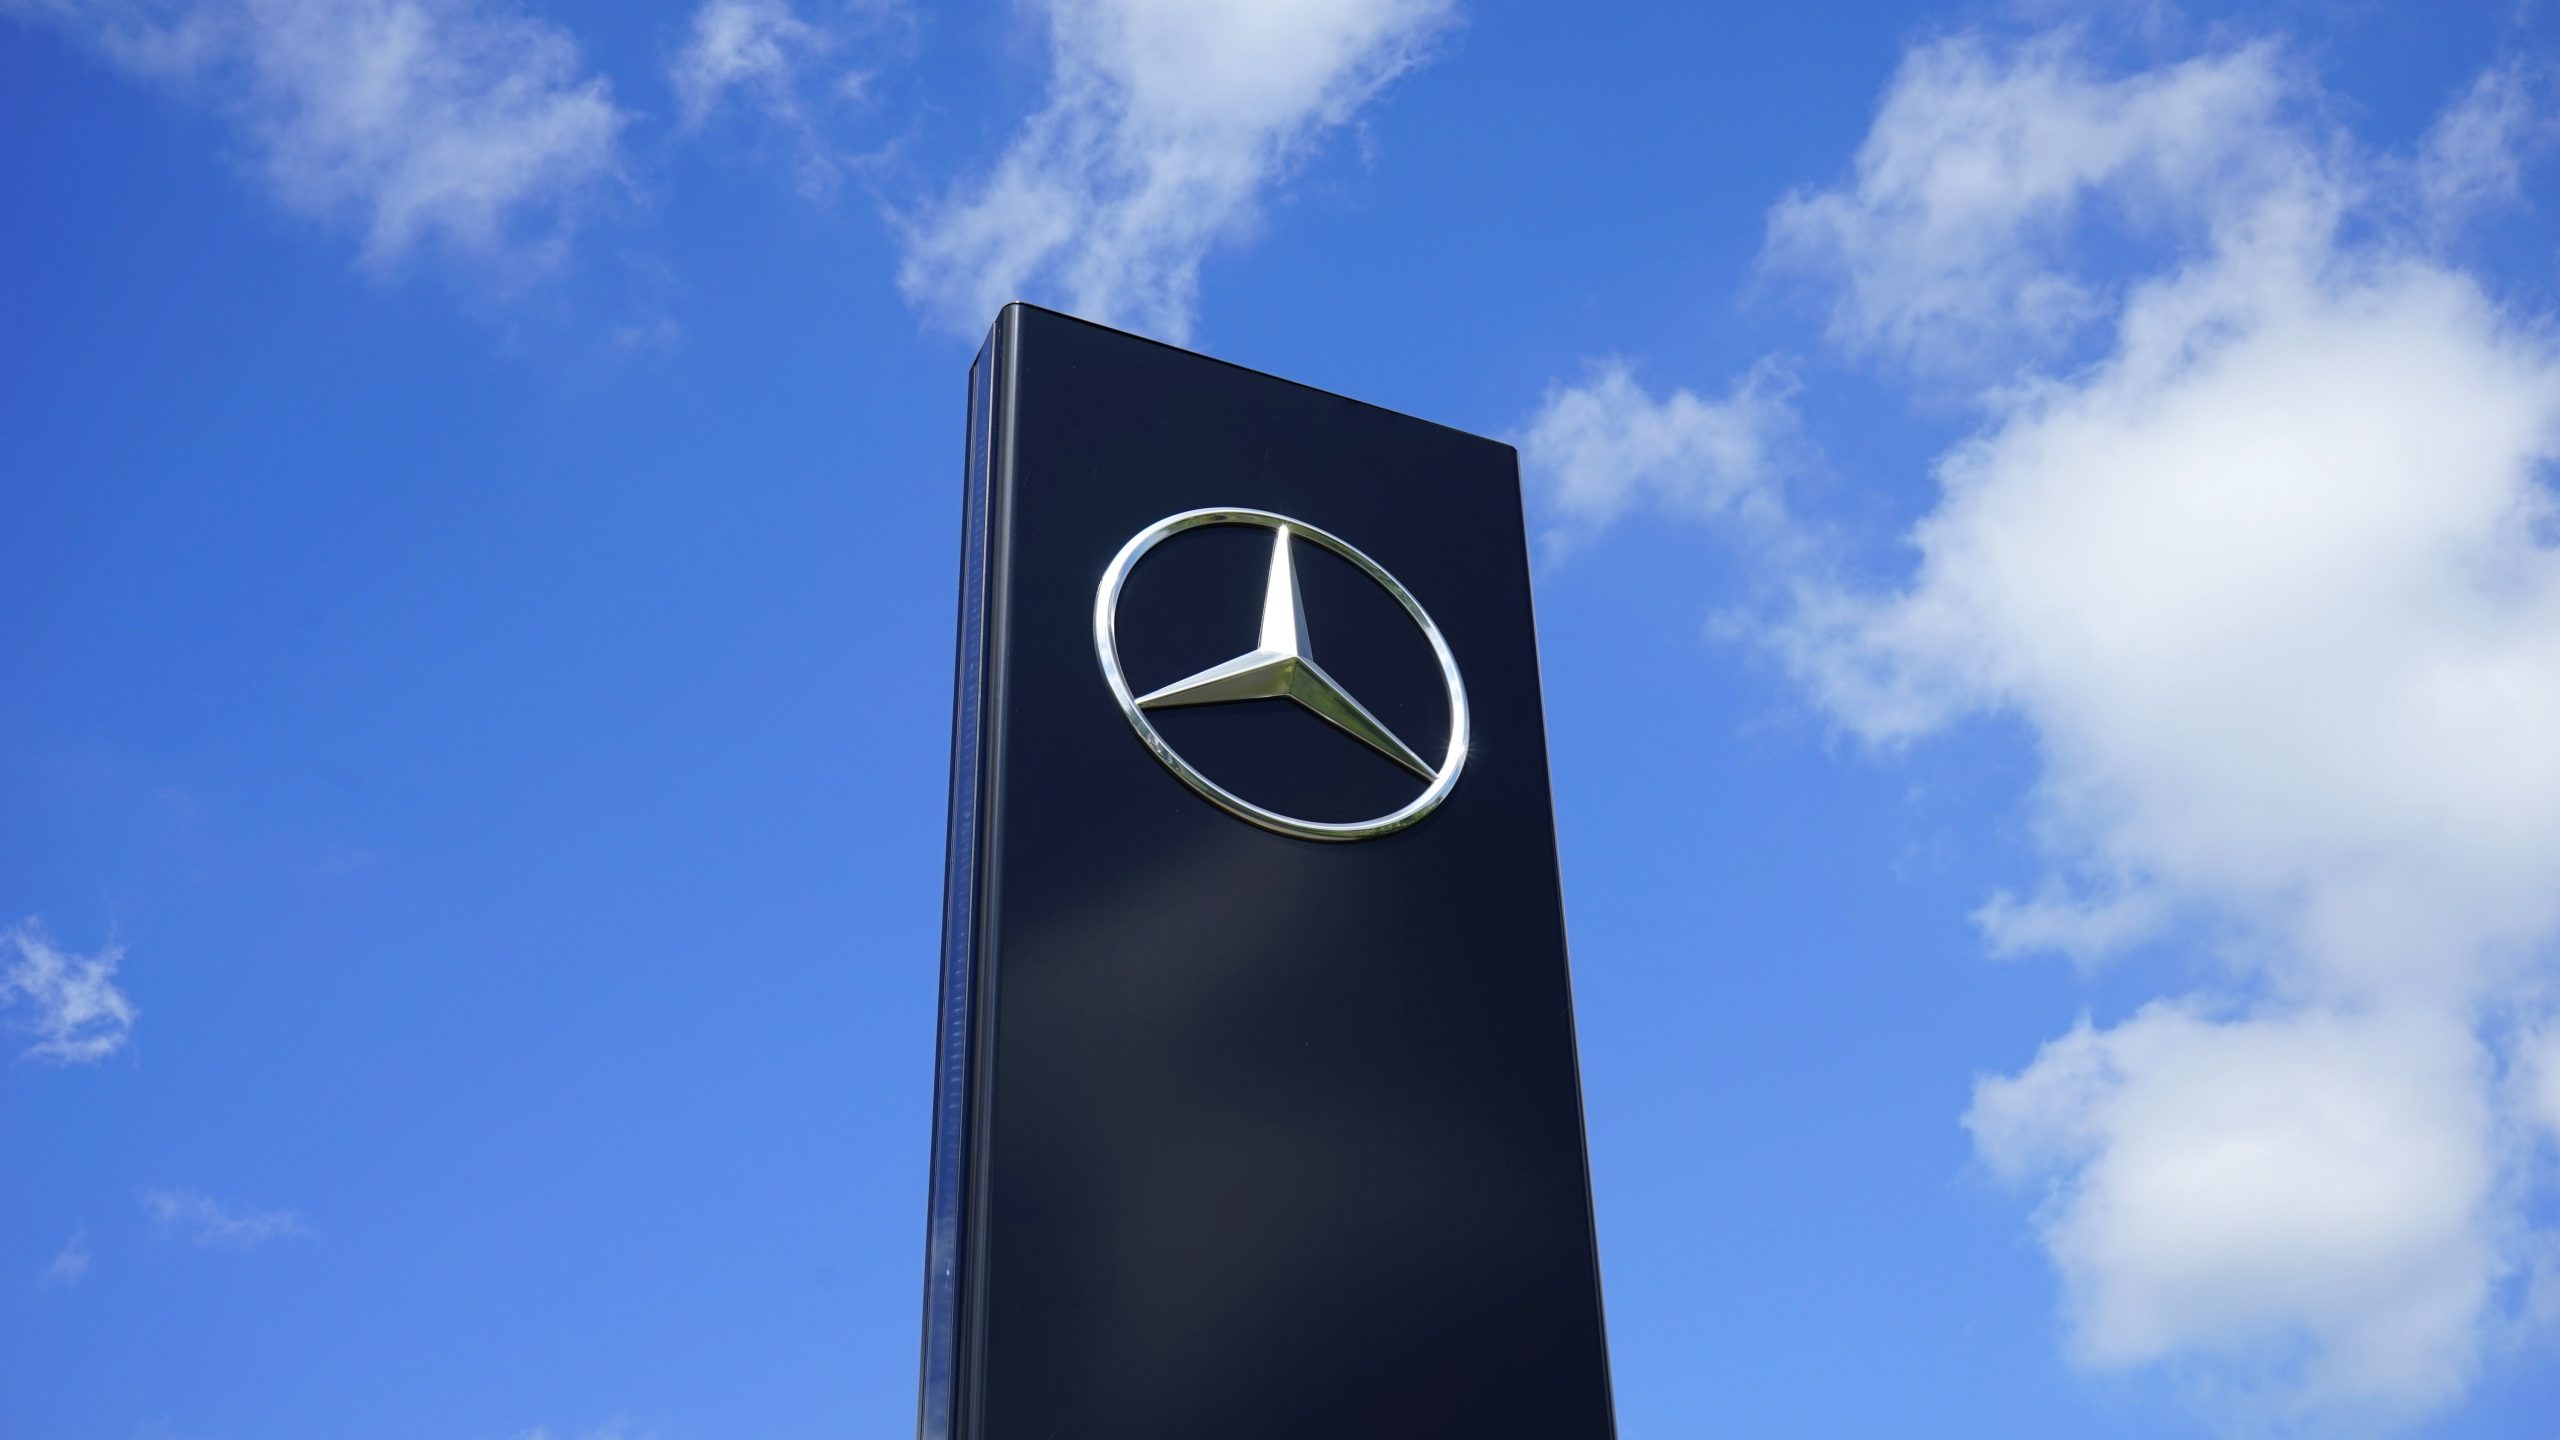 The Mercedes-Benz logo is known for its metallic colour, but is just as easily noted in black and white